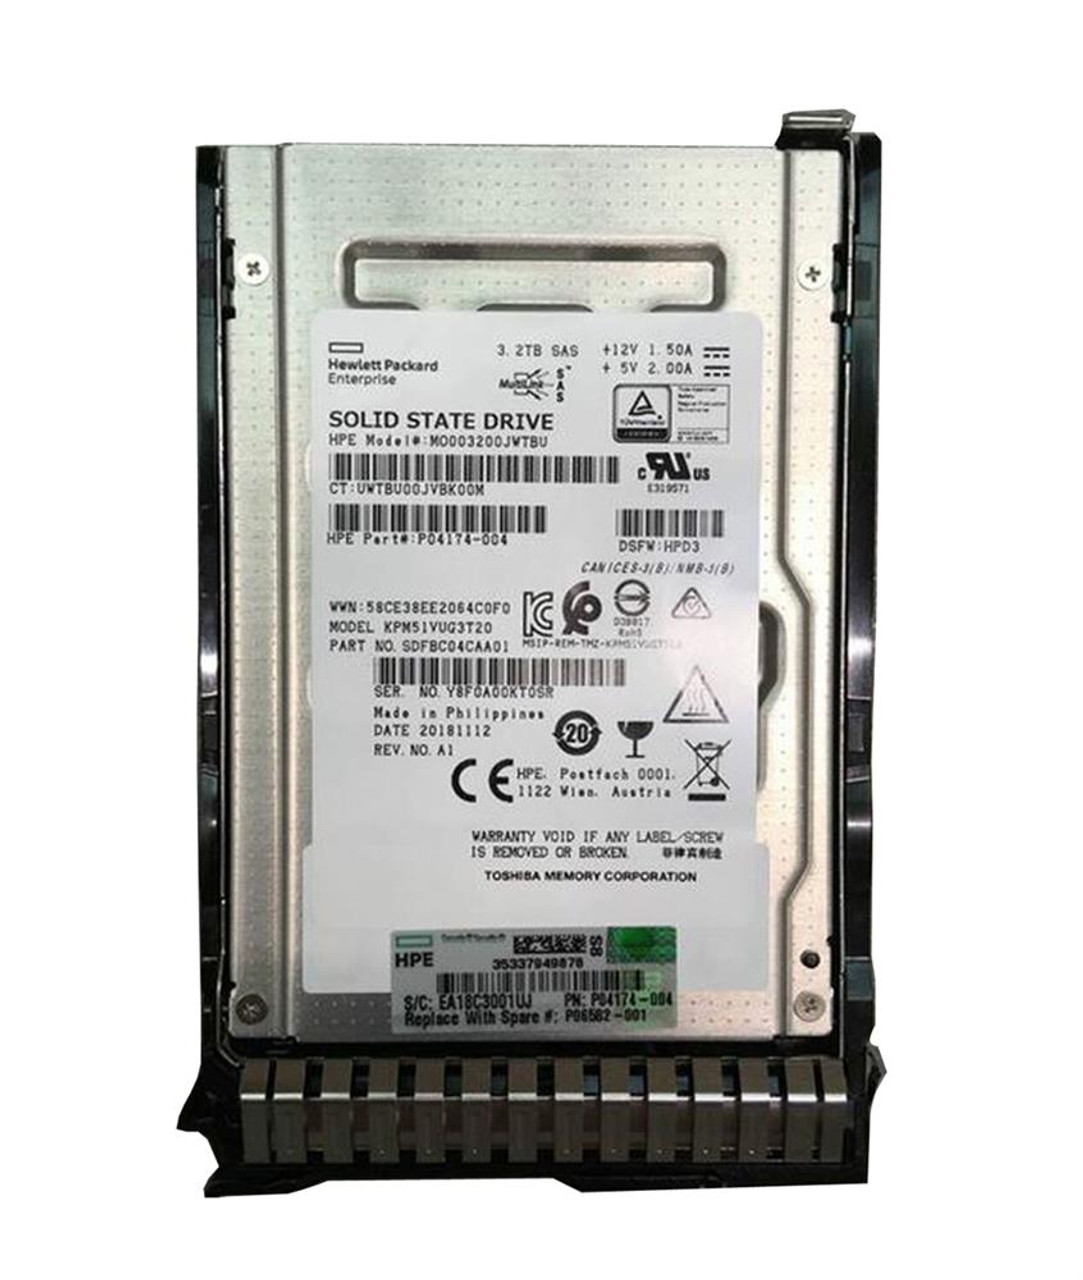 P04174-004 HPE 3.2TB SAS 12Gbps Mixed Use 2.5-inch Internal Solid State Drive (SSD) with Smart Carrier